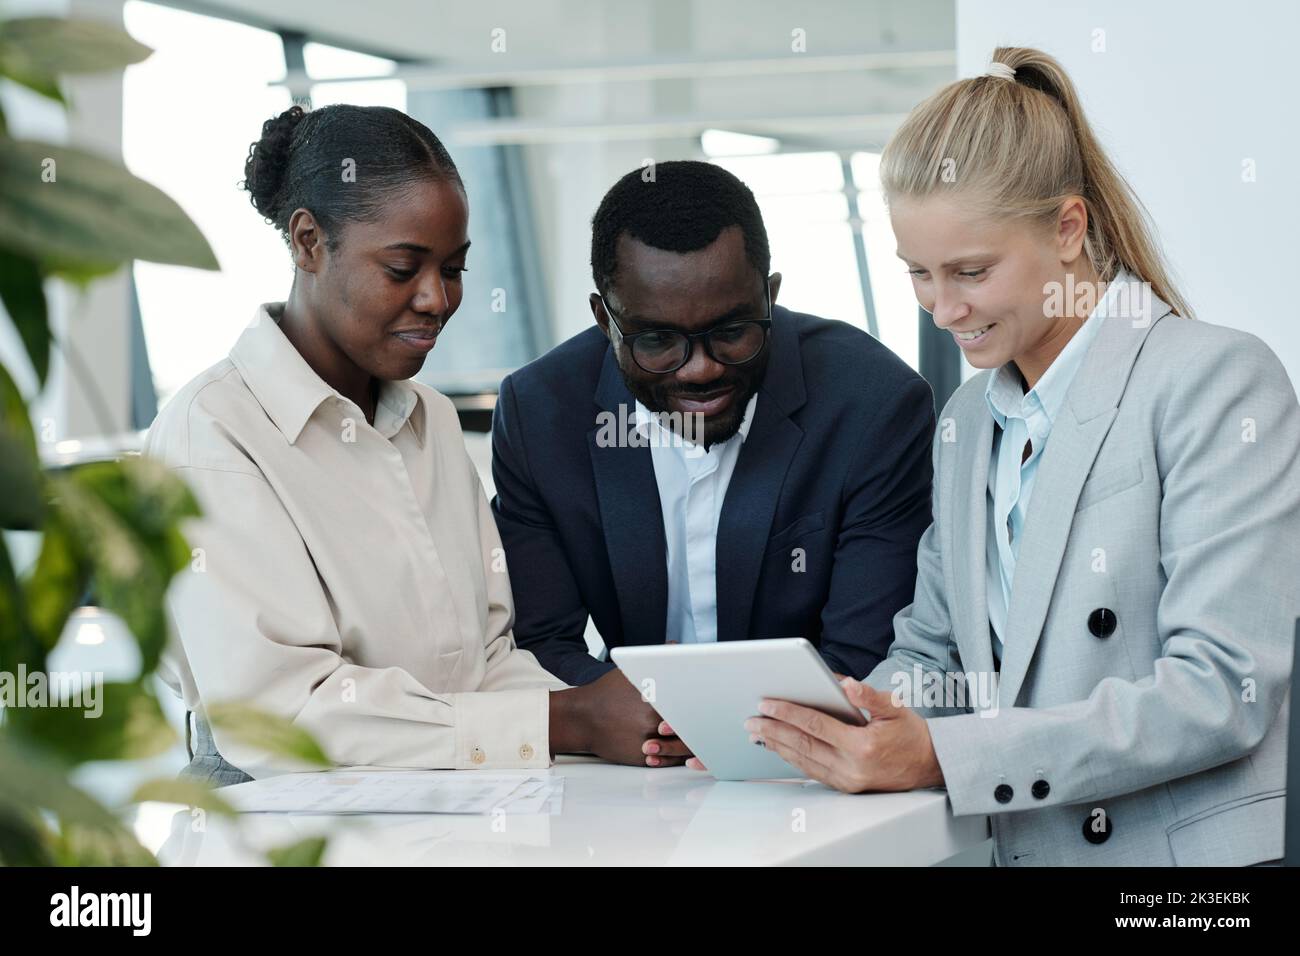 Group of young intercultural managers in formalwear looking at tablet screen while discussing financial data at working meeting Stock Photo